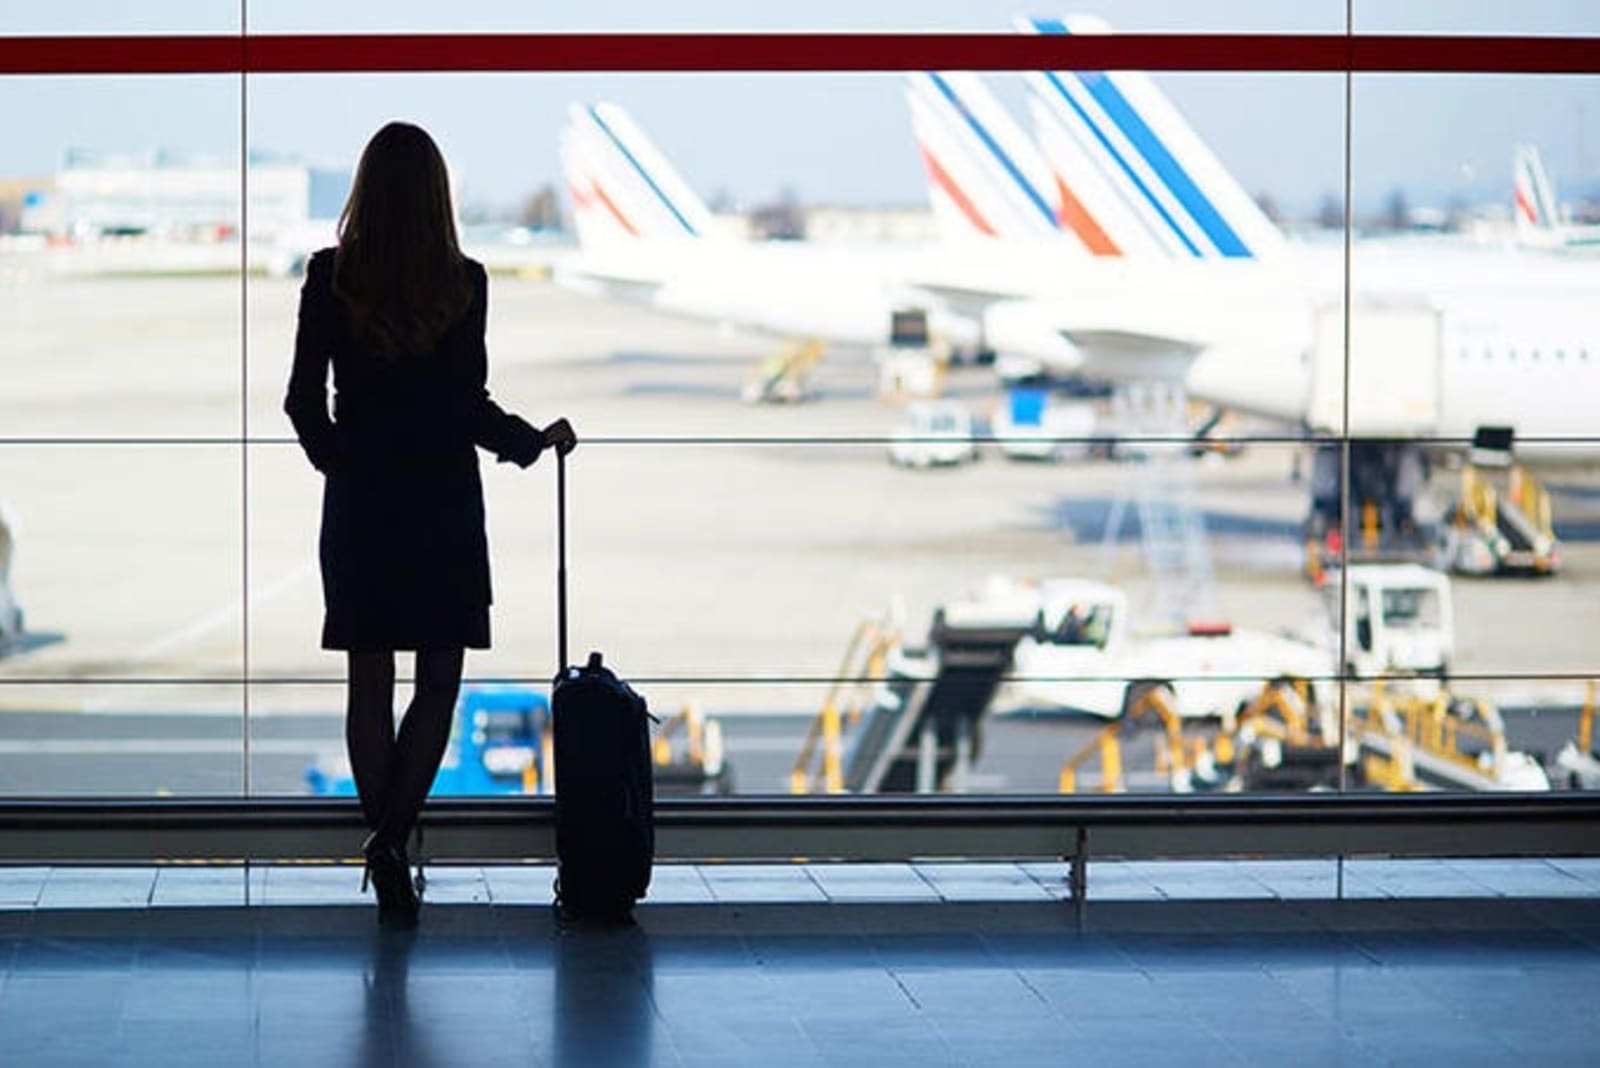 rs-2young-woman-airport-shutterstock_548902405.jpeg